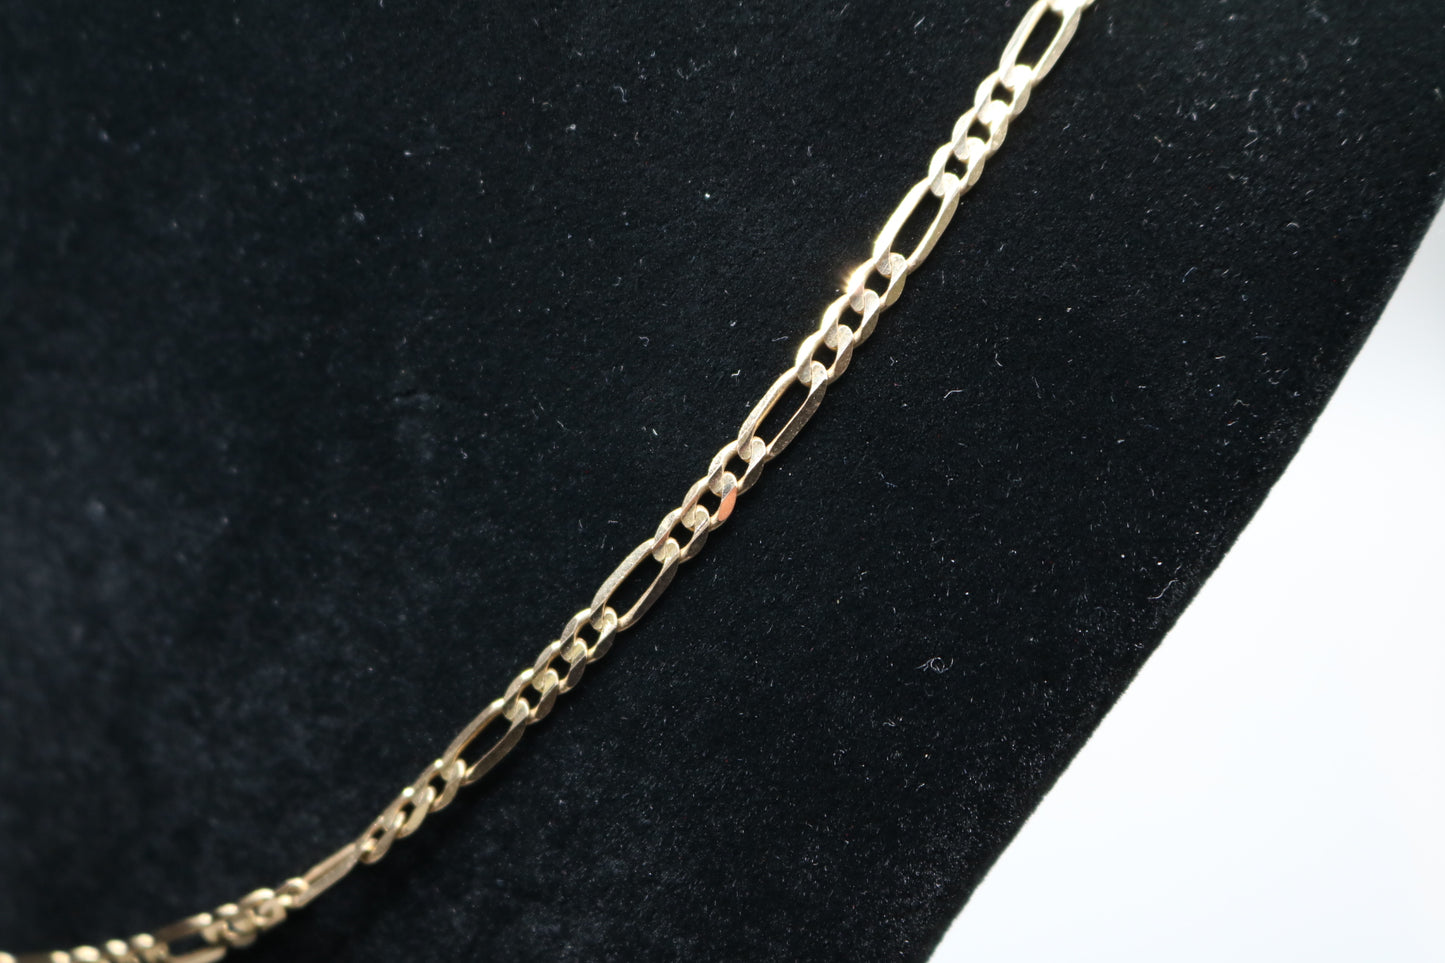 14K Yellow Gold Figaro Style Chain (26 Inches)